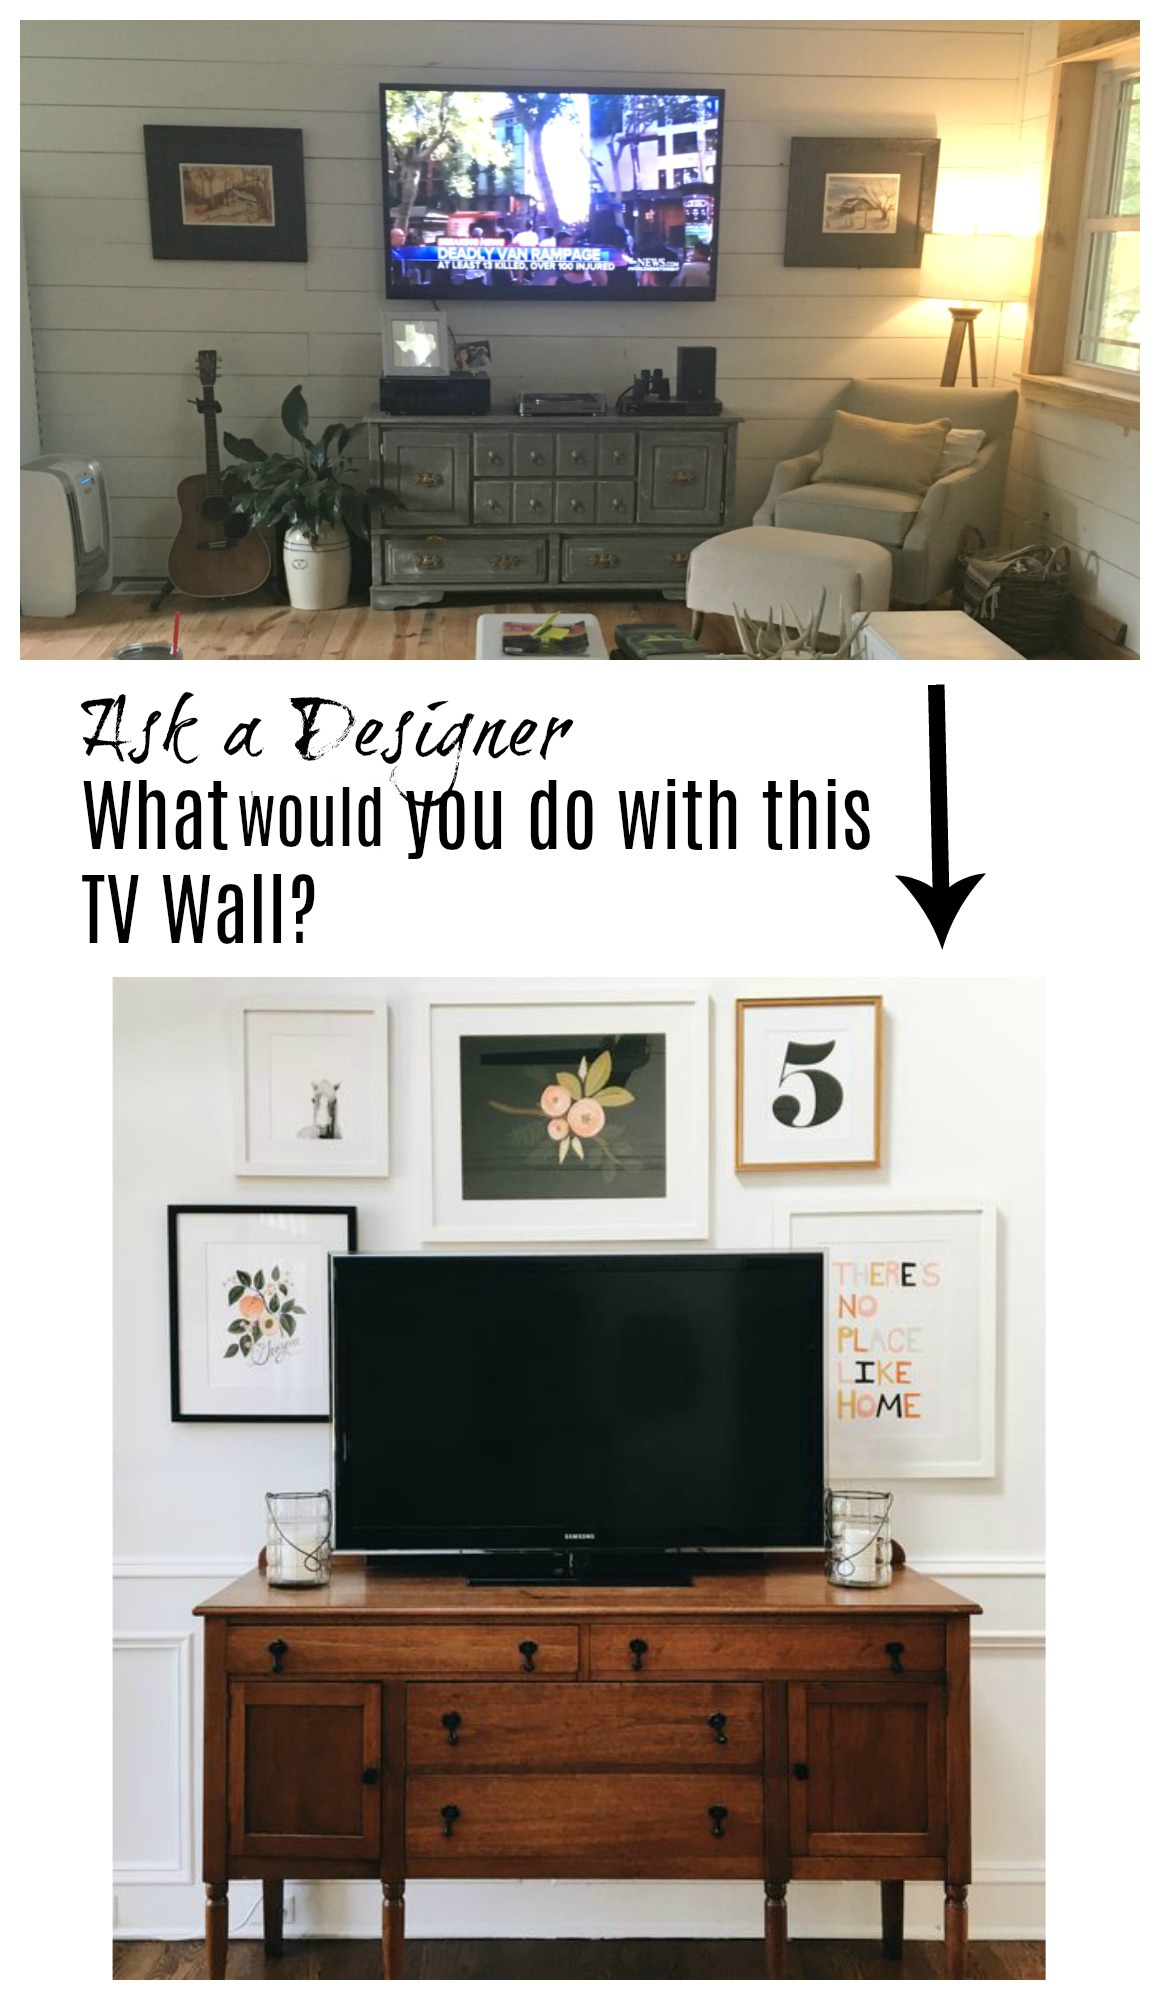 Three Mistakes Made To Tv Walls And How To Fix It - Plank Wall Ideas For Tv - HD Wallpaper 